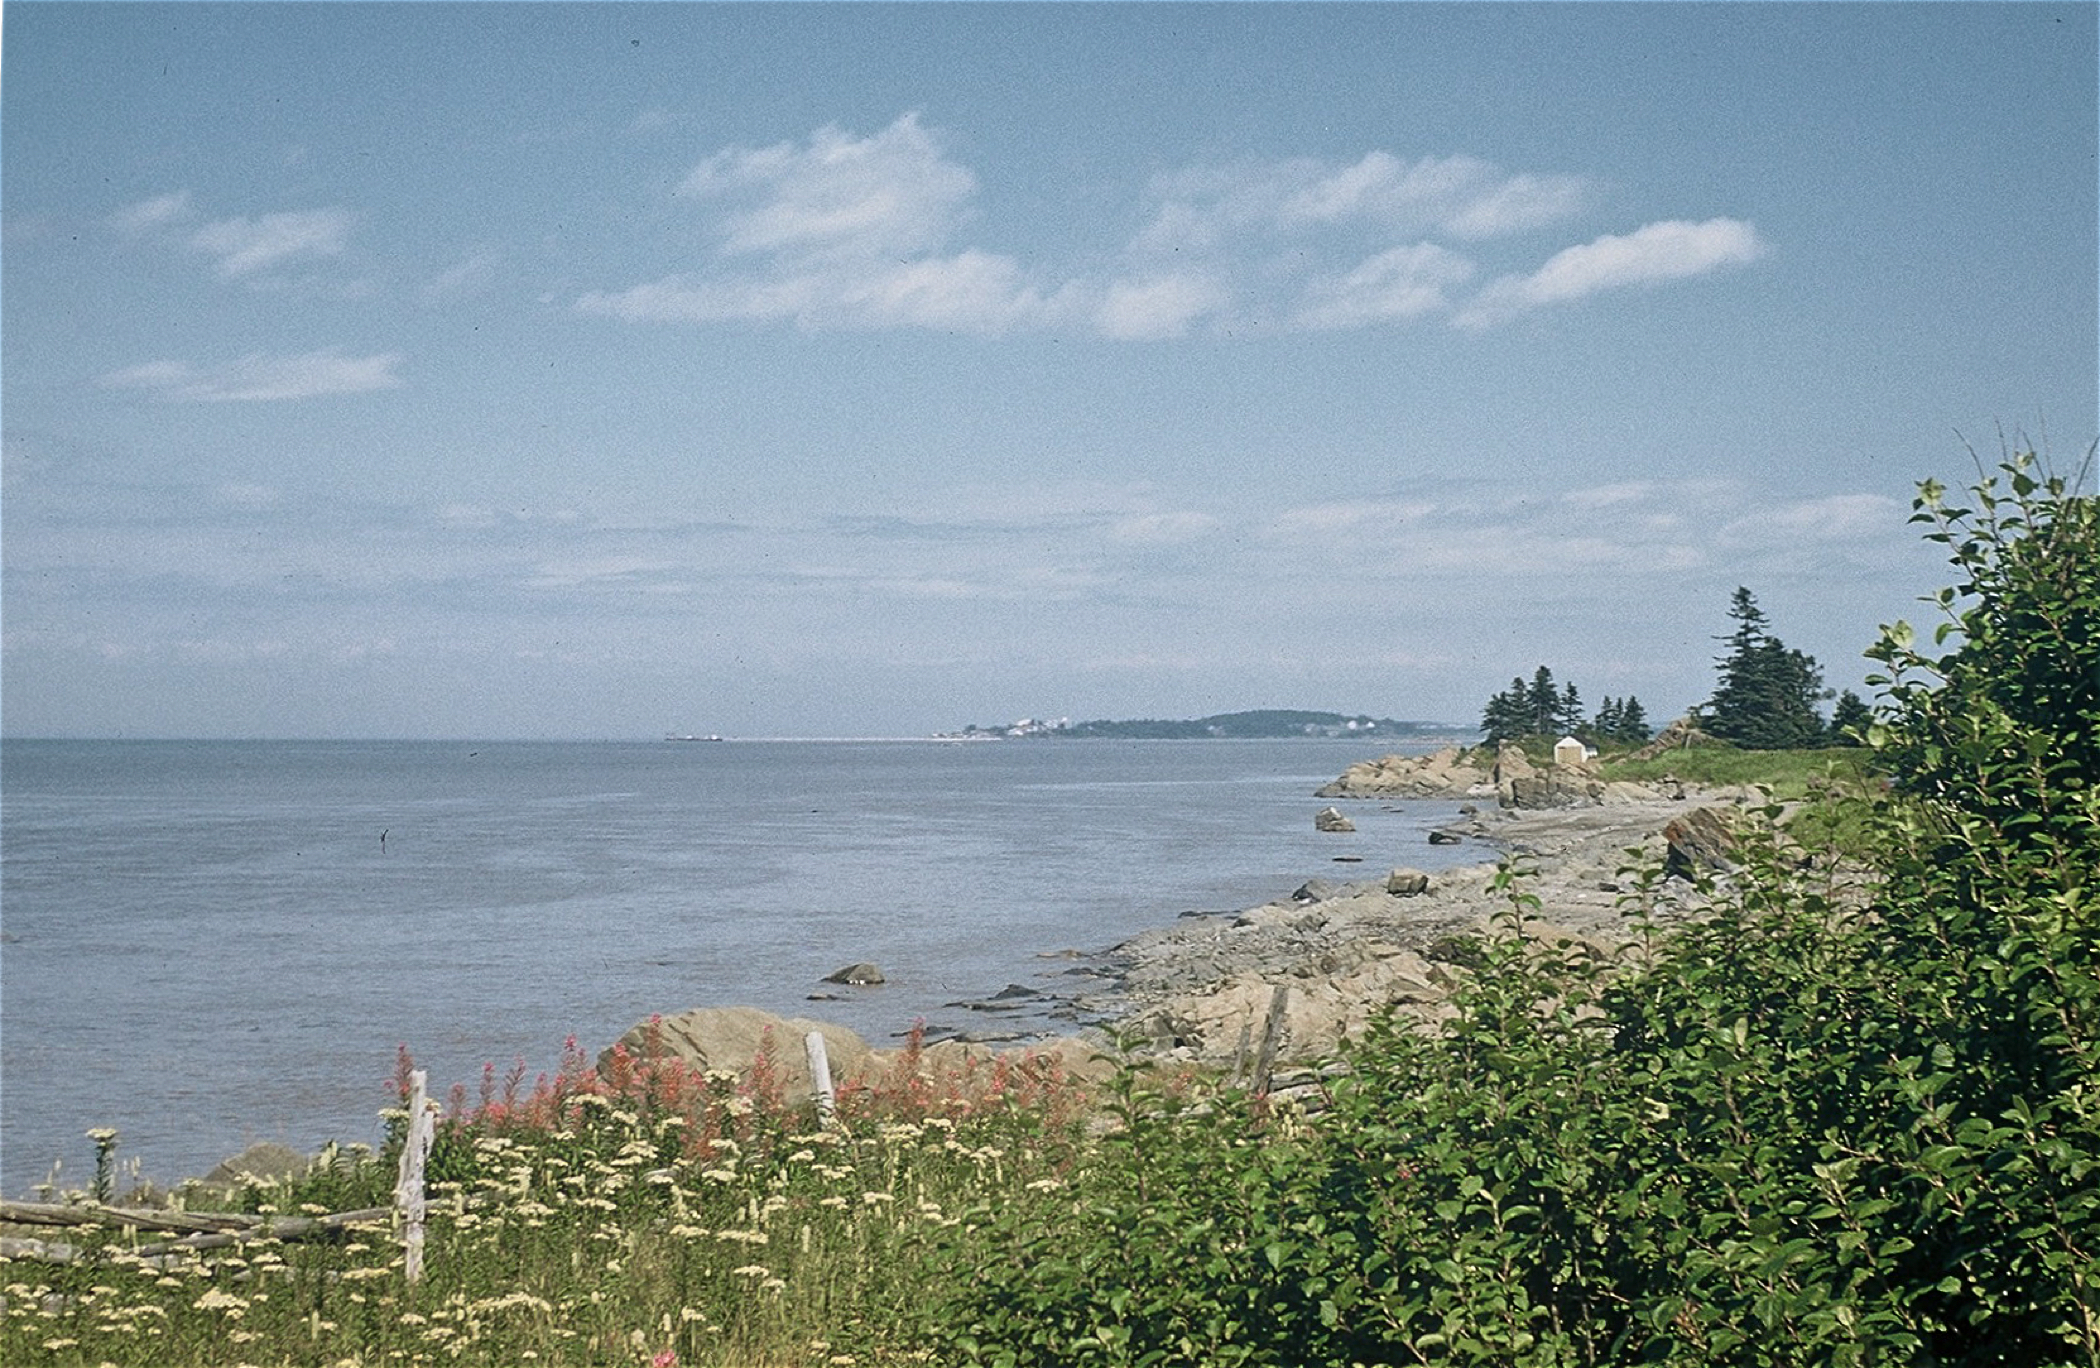 Colour photograph of a riverside scene at Rivière-du-Loup with a wooden fence in the foreground, rocks, sand, and shrubs as well as the river and some clouds in the sky.